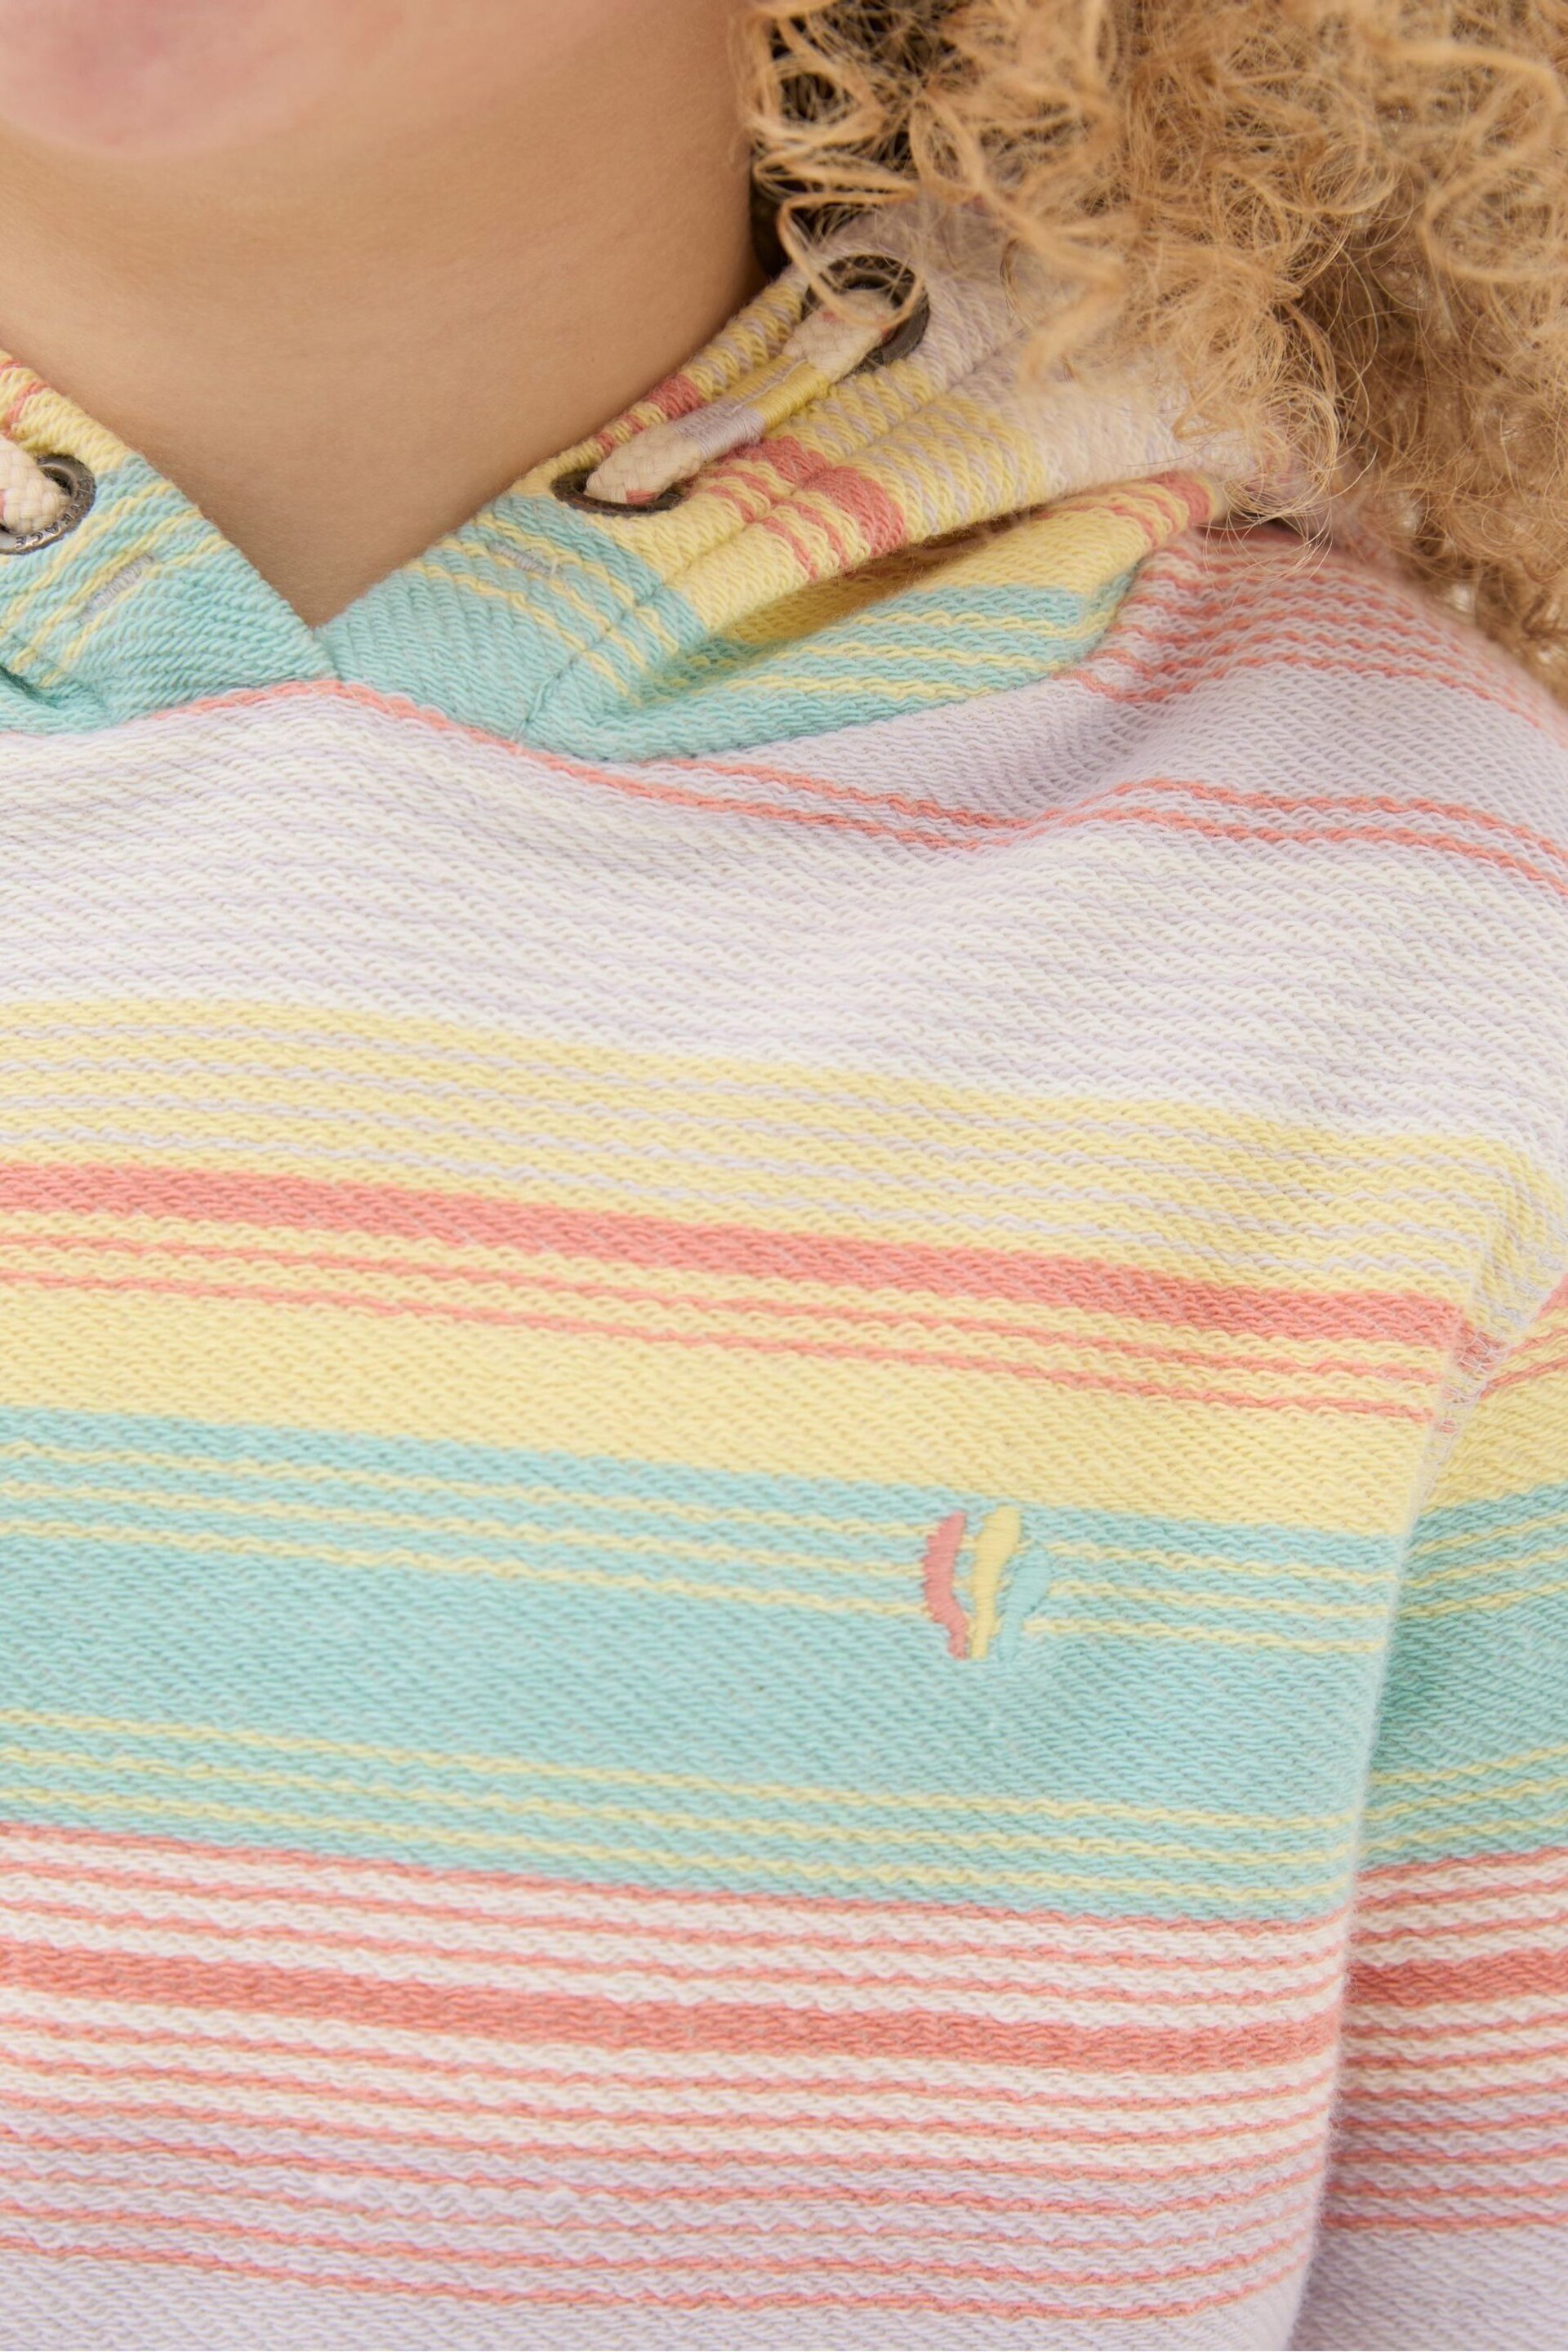 FatFace Multi Textured Stripe Popover Hoodie - Image 4 of 5